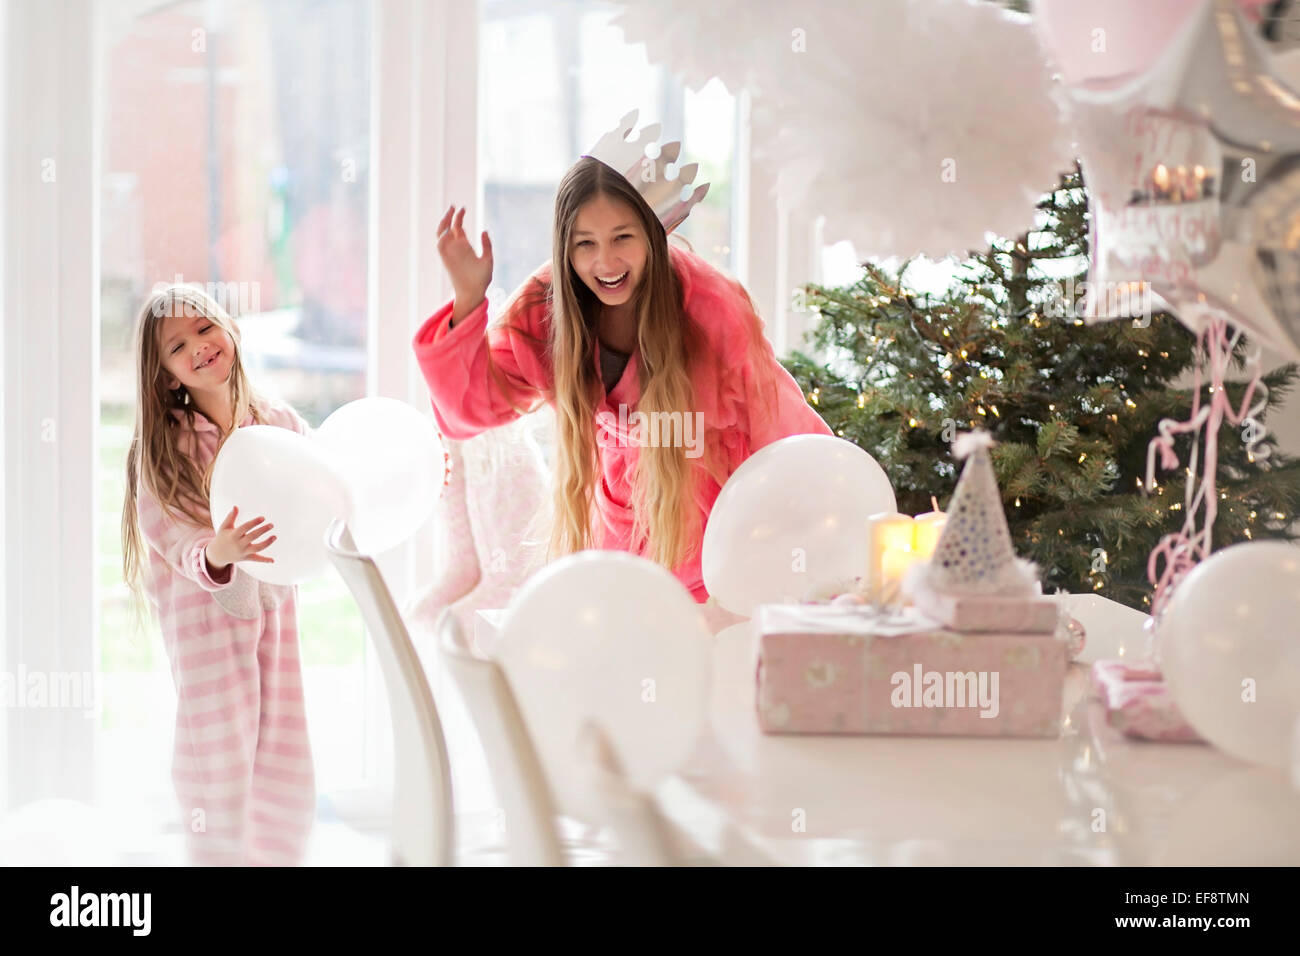 Two girls (4-5,14-15) playing with balloons by Christmas tree Stock Photo